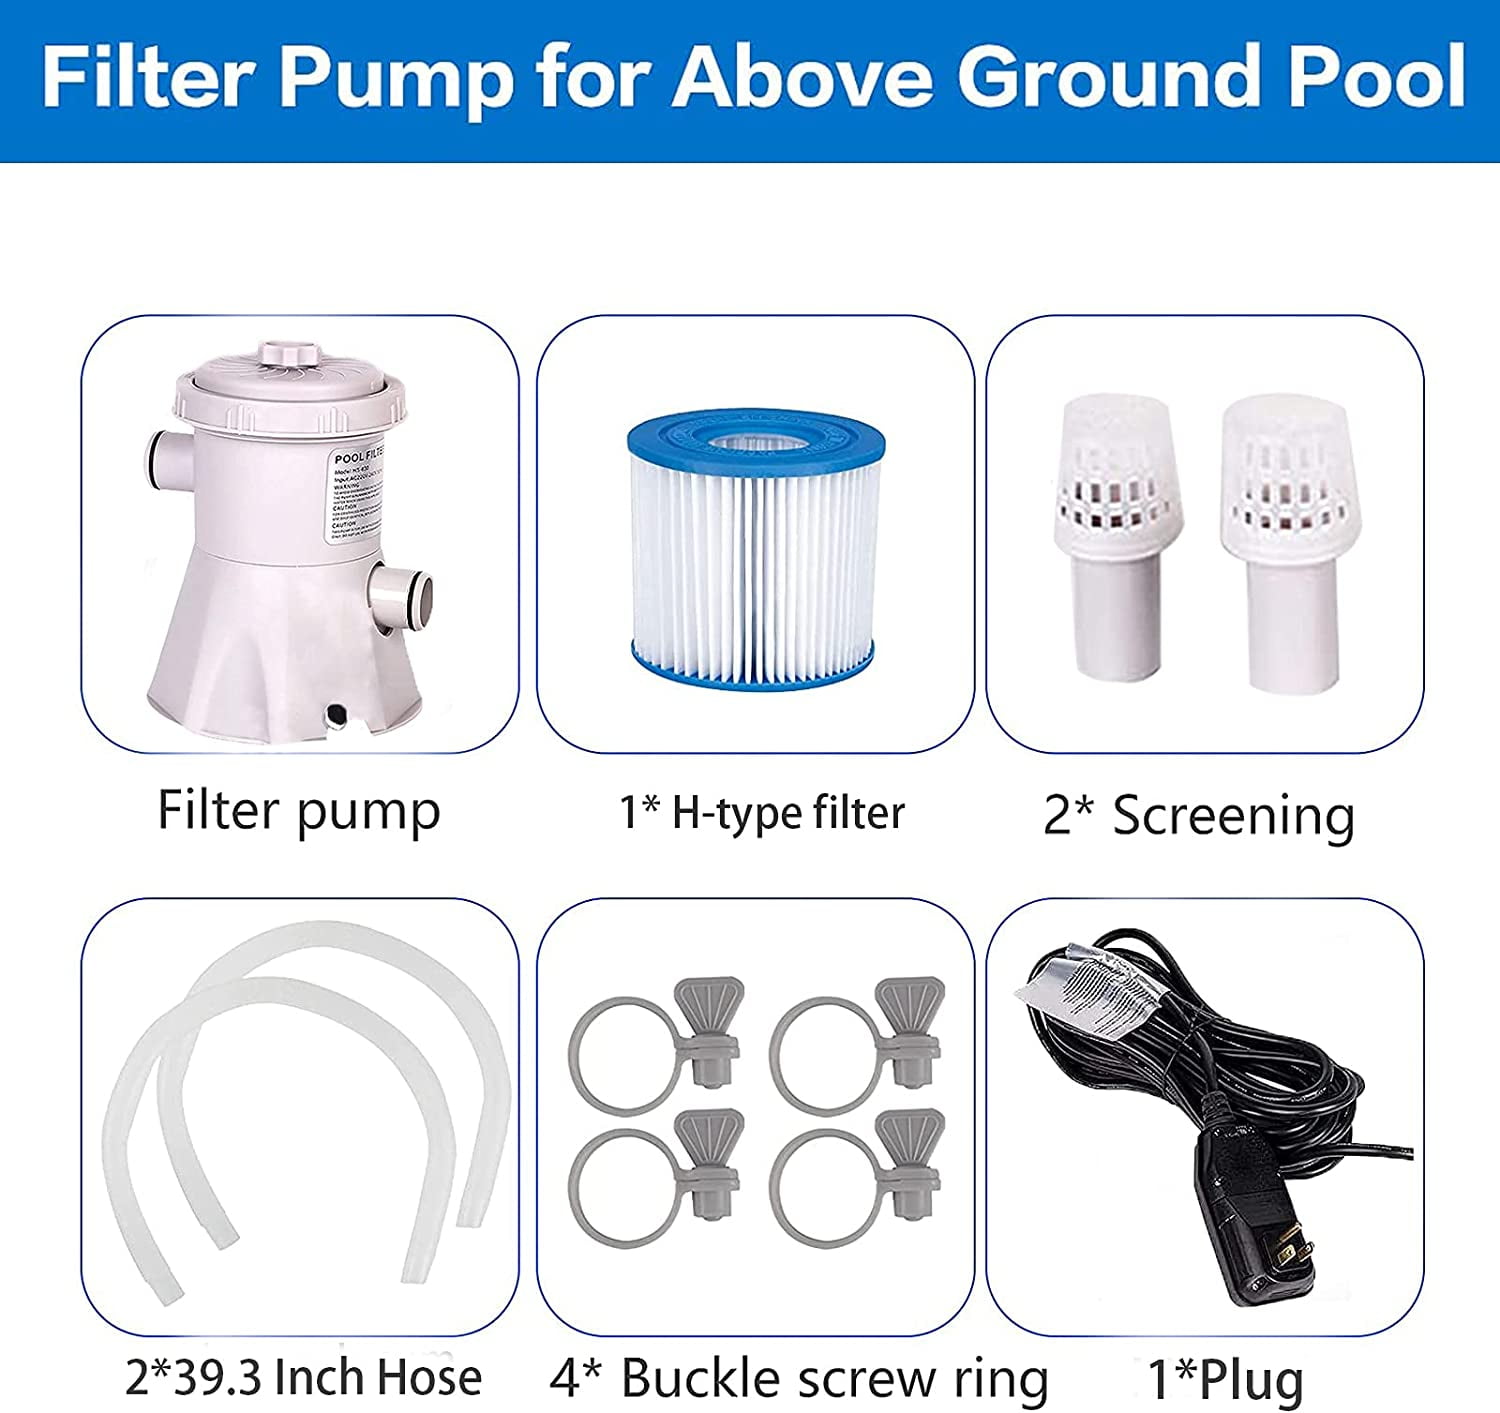 300-2,200 Gallon Pools ACOOLOO Swimming Pool Filter Pump Electric Aneralied Cartridge Water Pump for Above Ground PoolsCleaning Tool 110-120V Filter Cartridge 